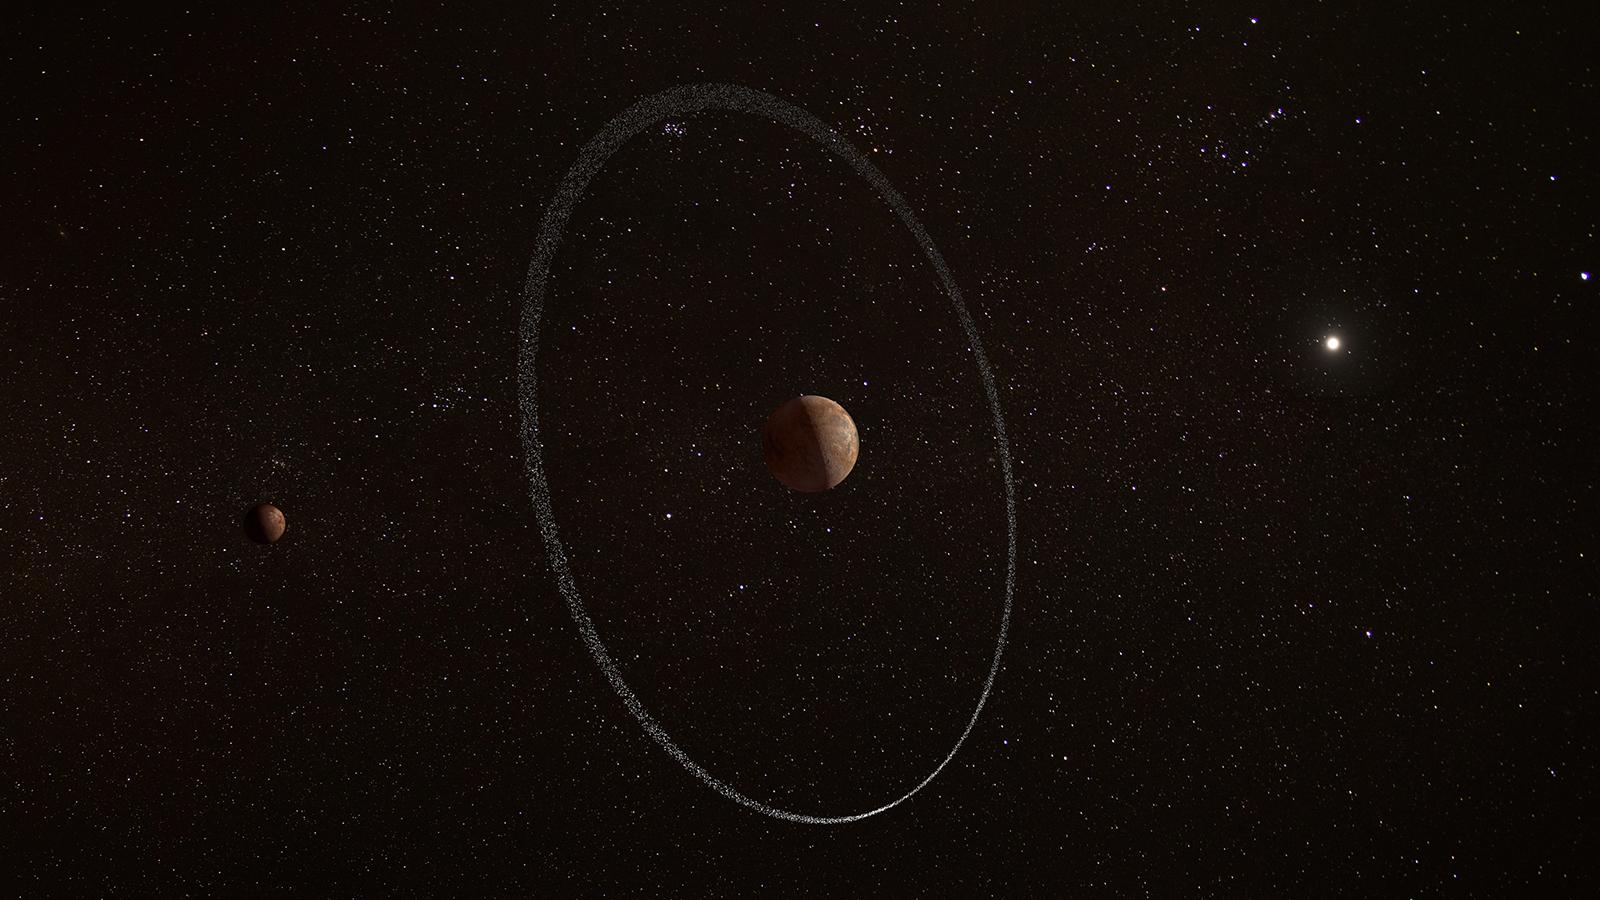 Artist impression of Quaoar and its ring